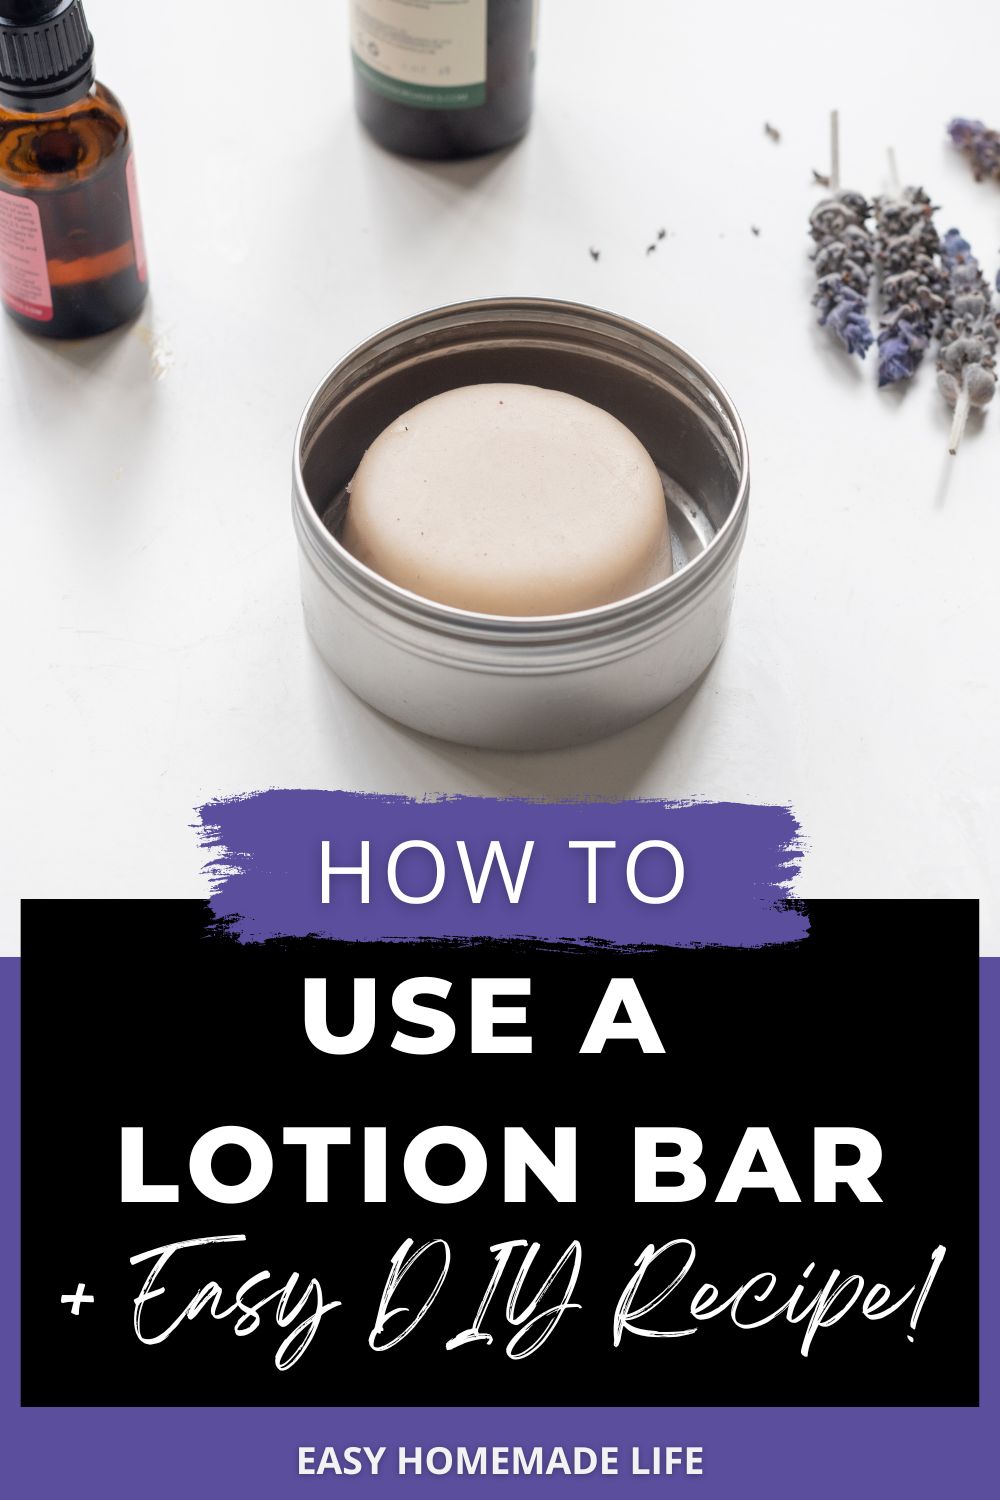 How to use a lotion bar, plus easy DIY recipe.